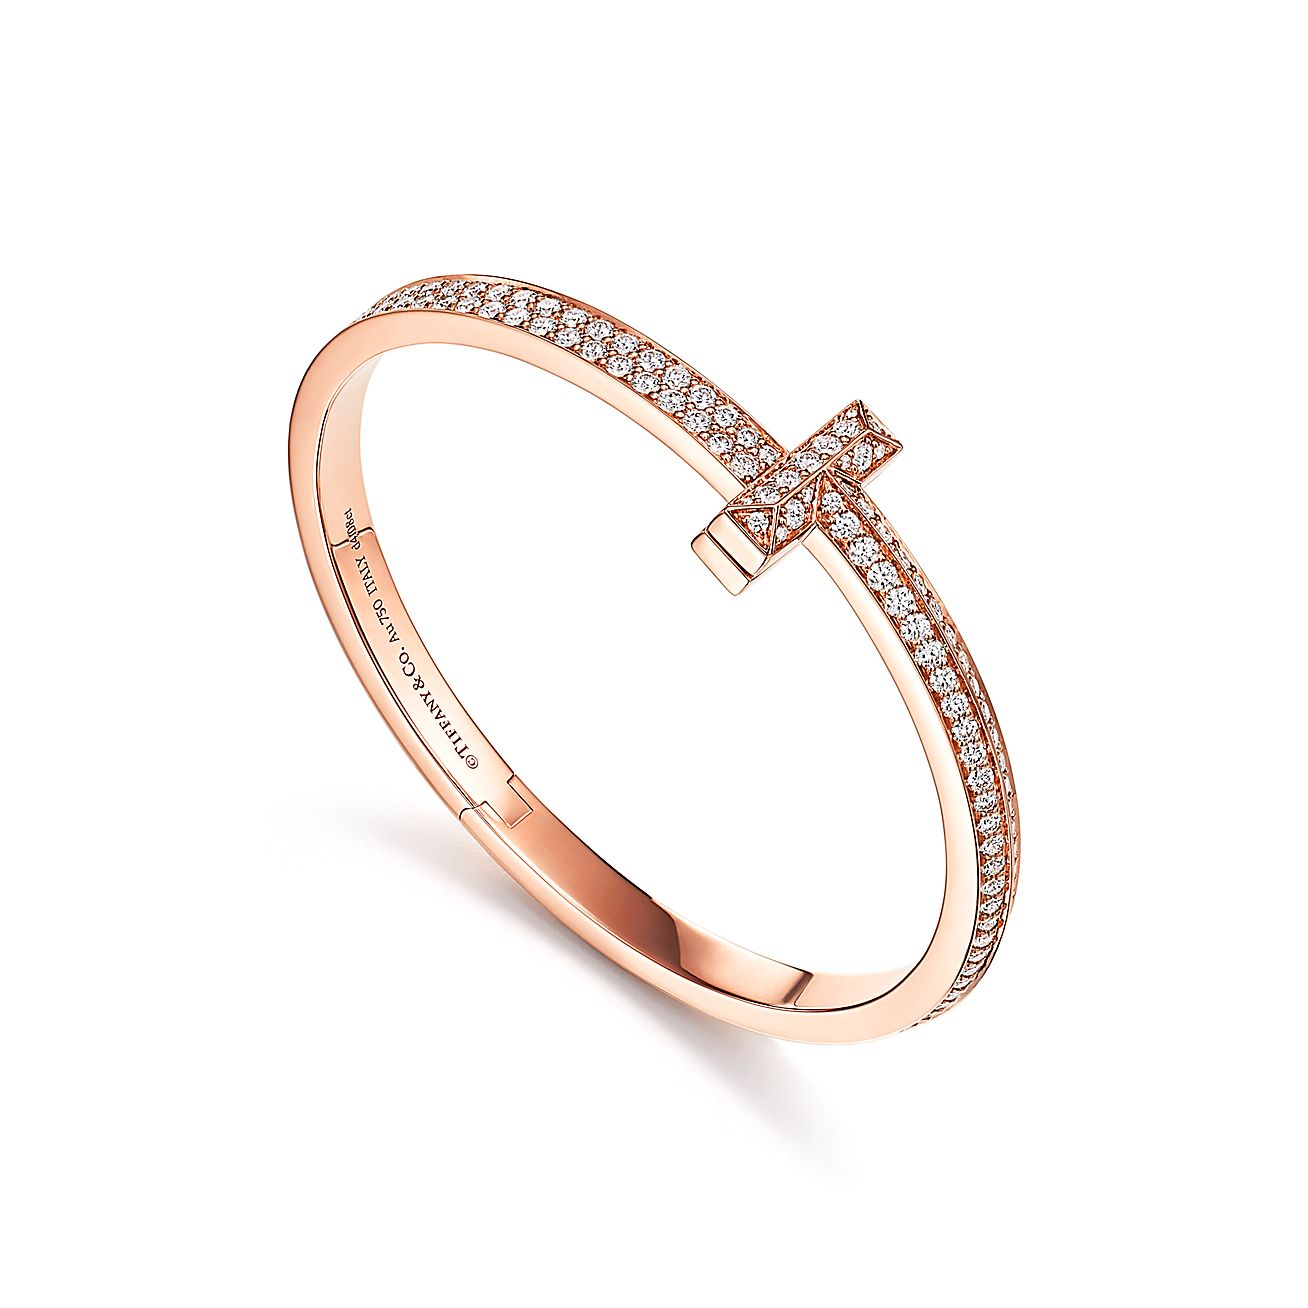 Tiffany T T1 Rose Gold Ring with Diamonds